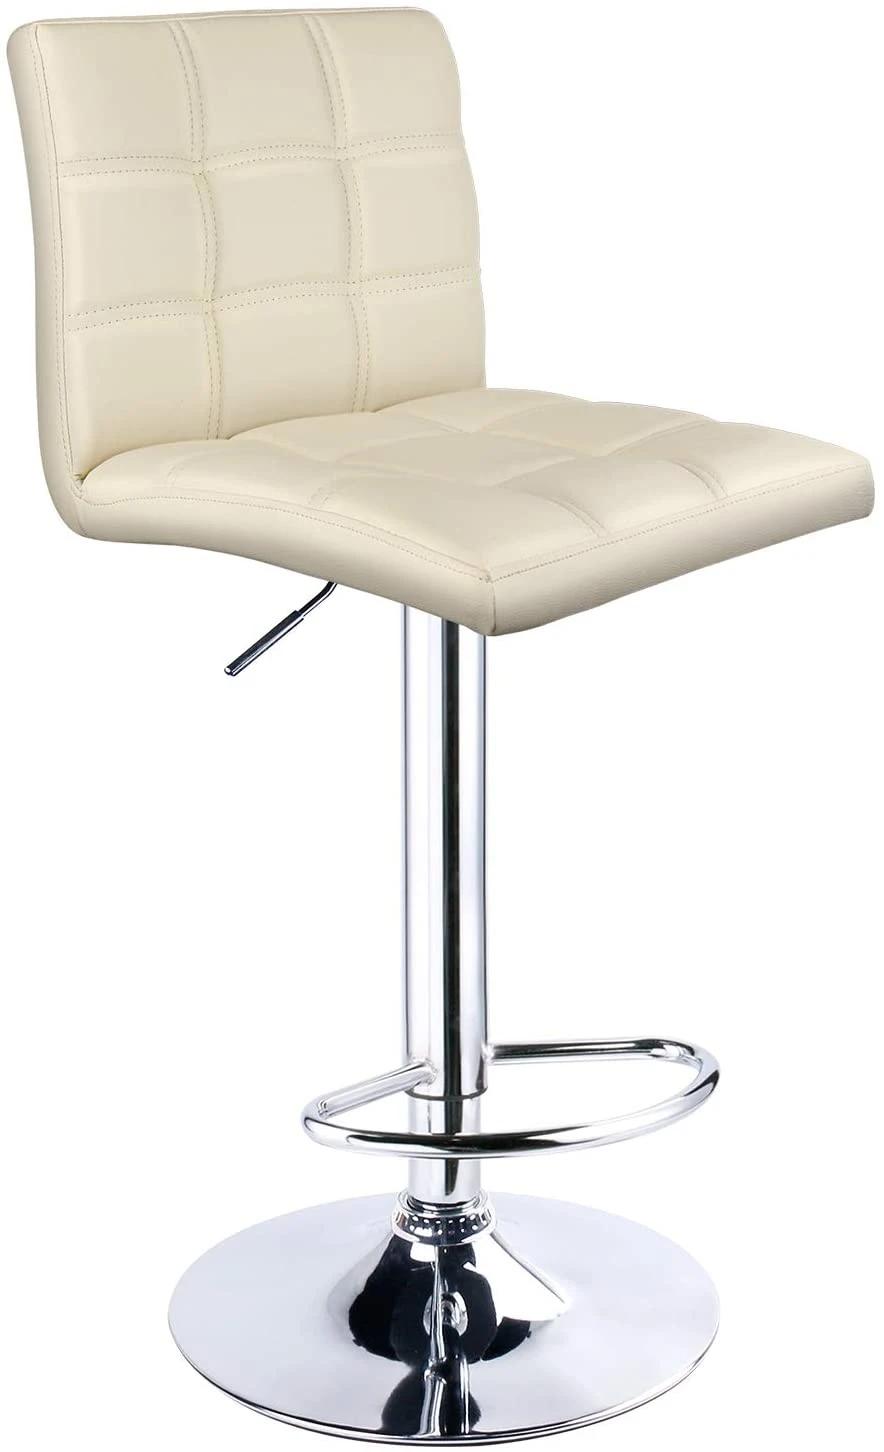 Seat Low Back Bar Chair Stool with Footrest Style ABS Modern Bar Classic Furniture Hotel Bar Stool